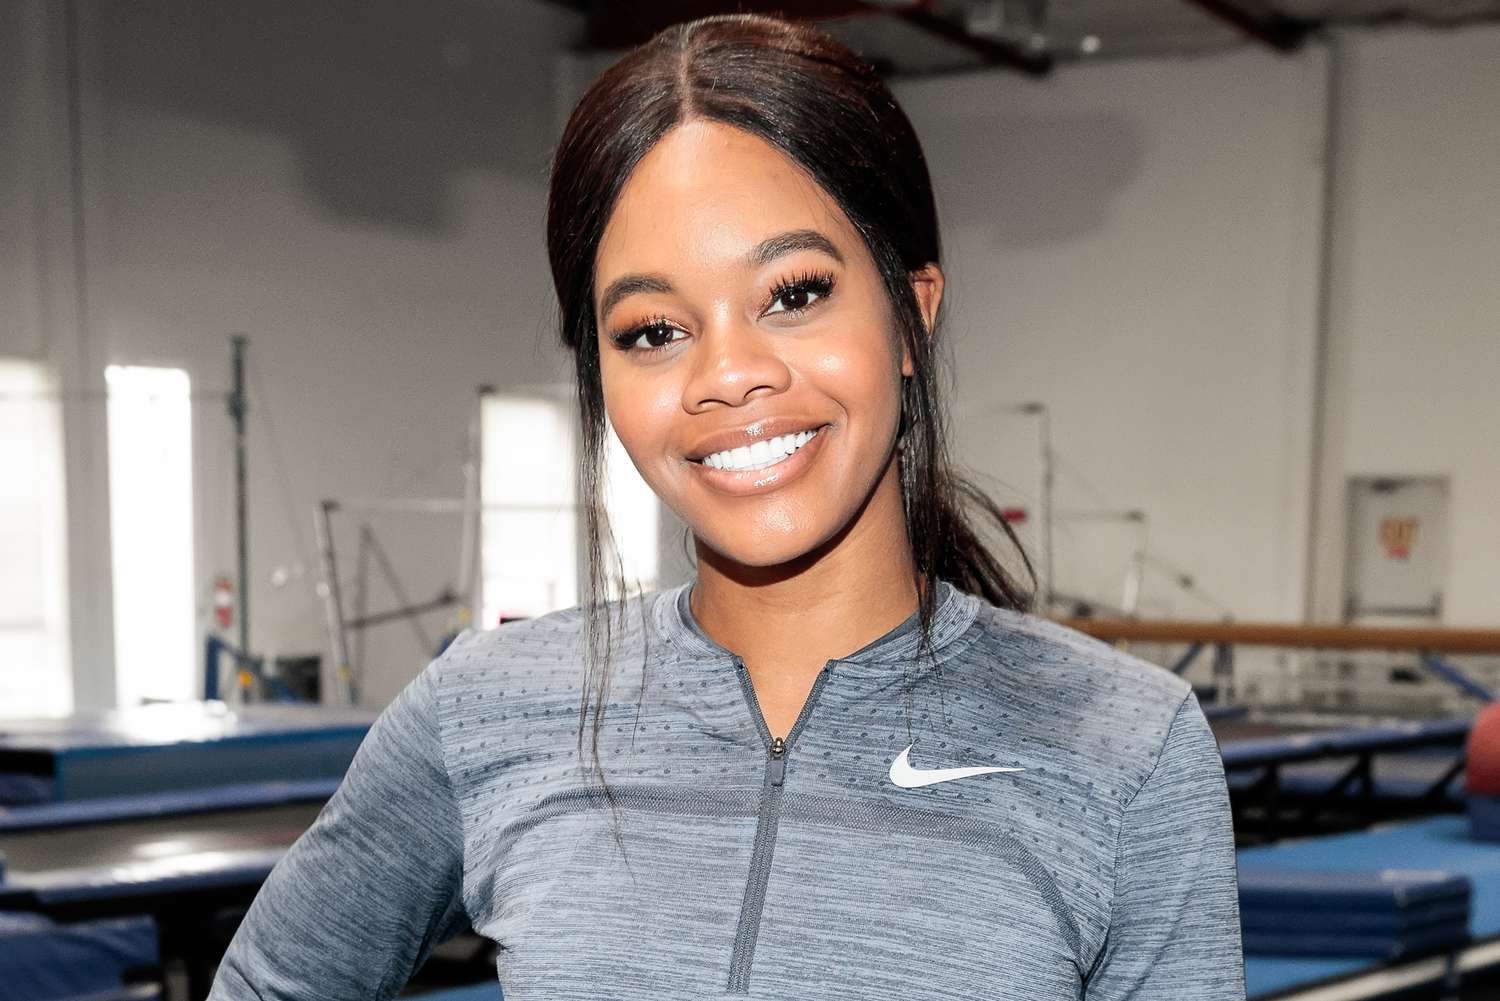 How to Watch Gabby Douglas' Return to Gymnastics? All About the American Classic